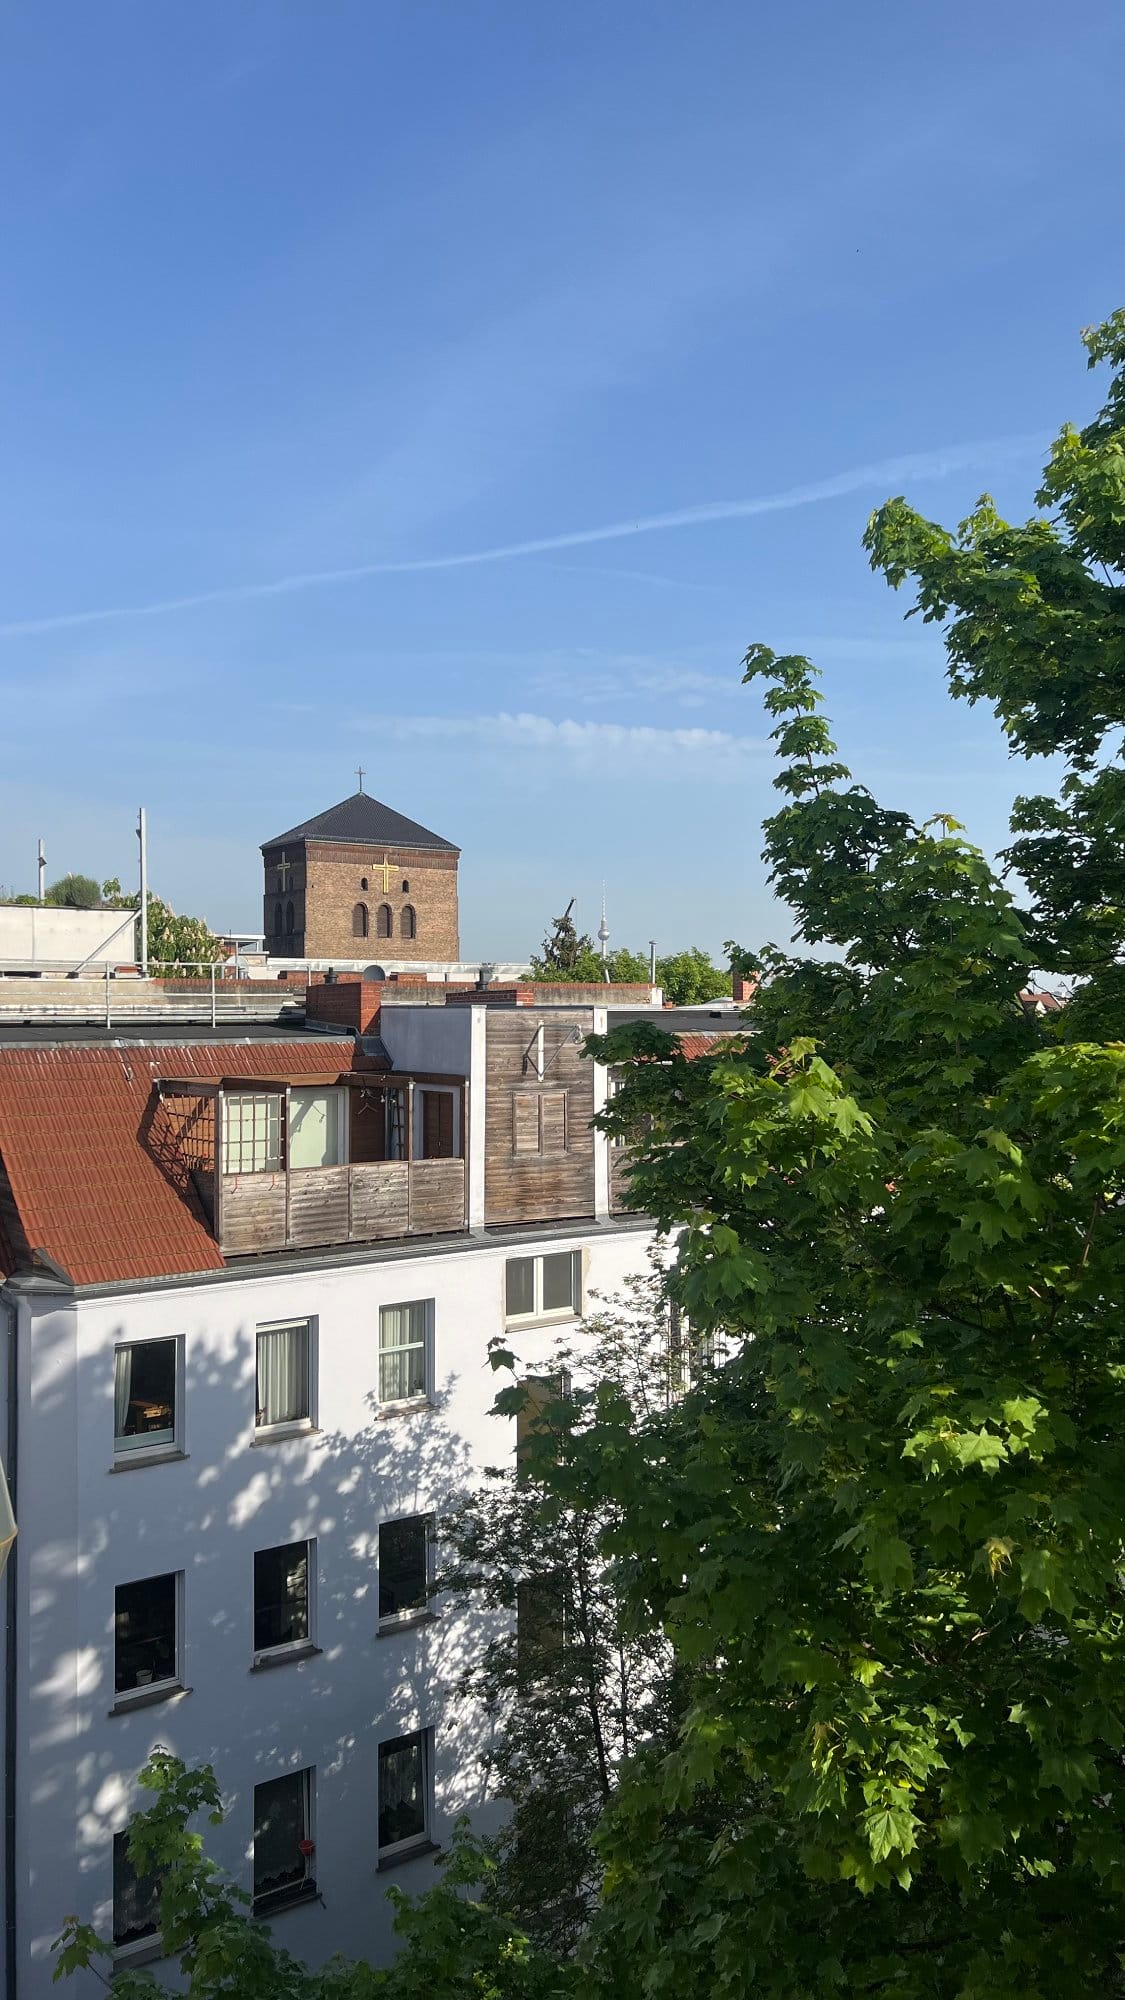 A view of a residential area in Berlin with a white building featuring multiple windows and balconies, a large leafy tree, and a historic brick tower with crosses and a pitched roof, all set against a clear blue sky